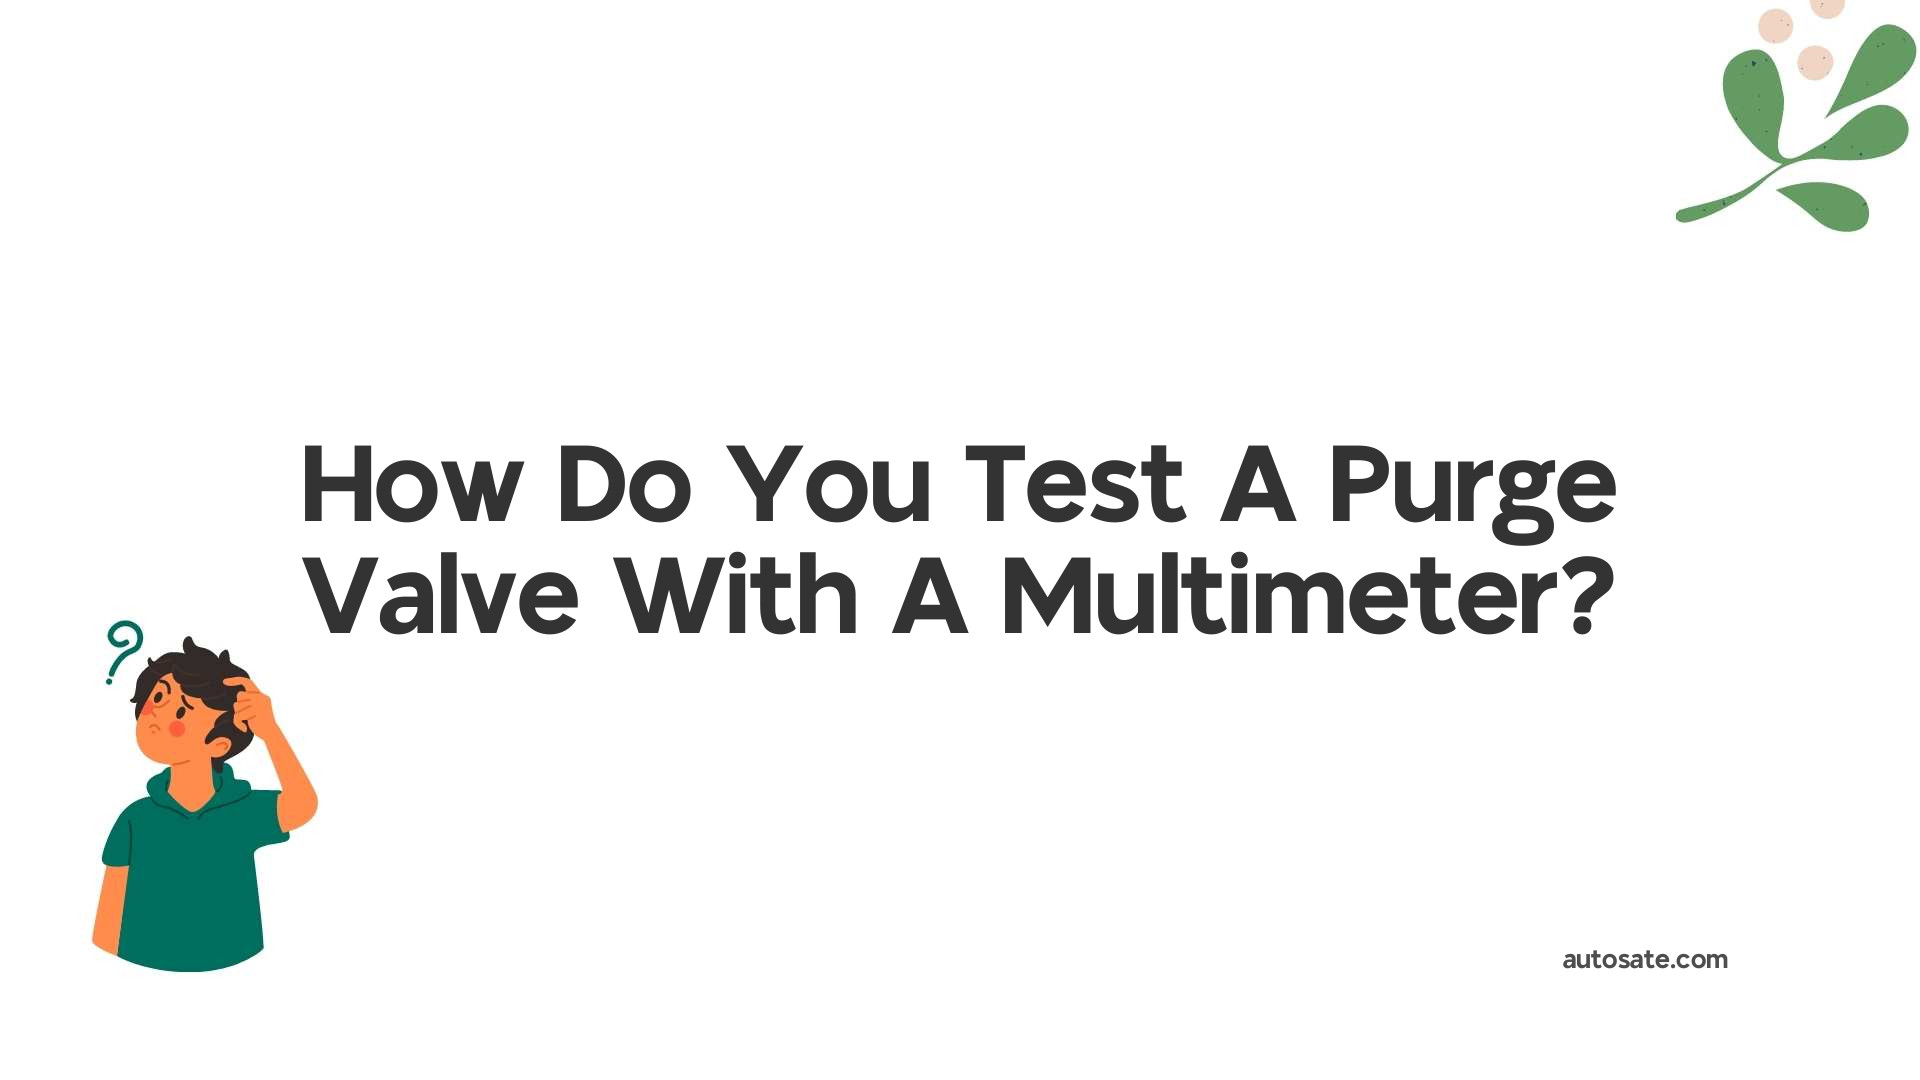 How Do You Test A Purge Valve With A Multimeter?